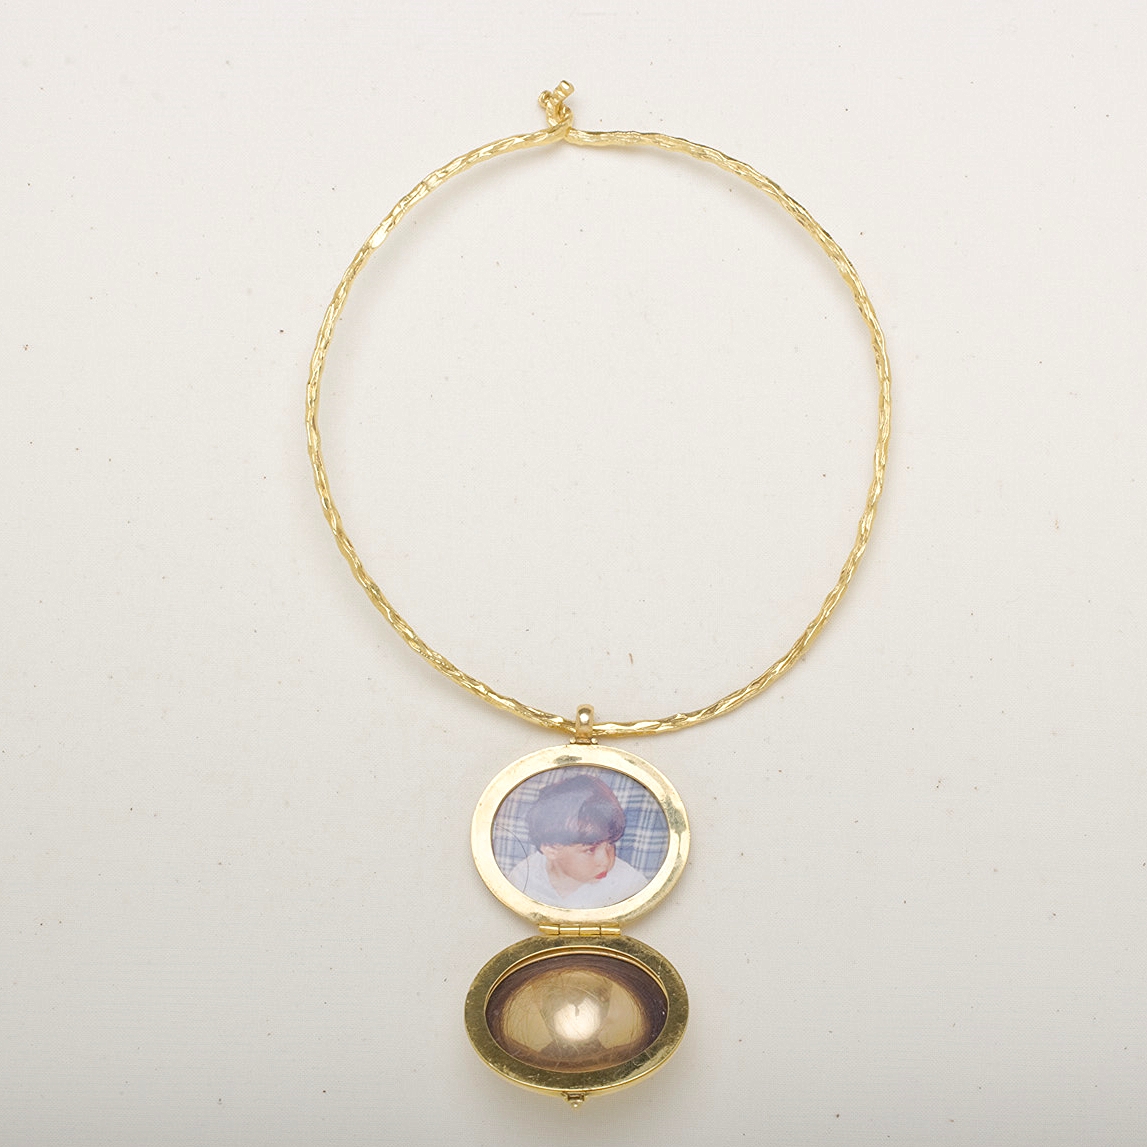   Marla's personal locket, which inspired the birth of her collection.  